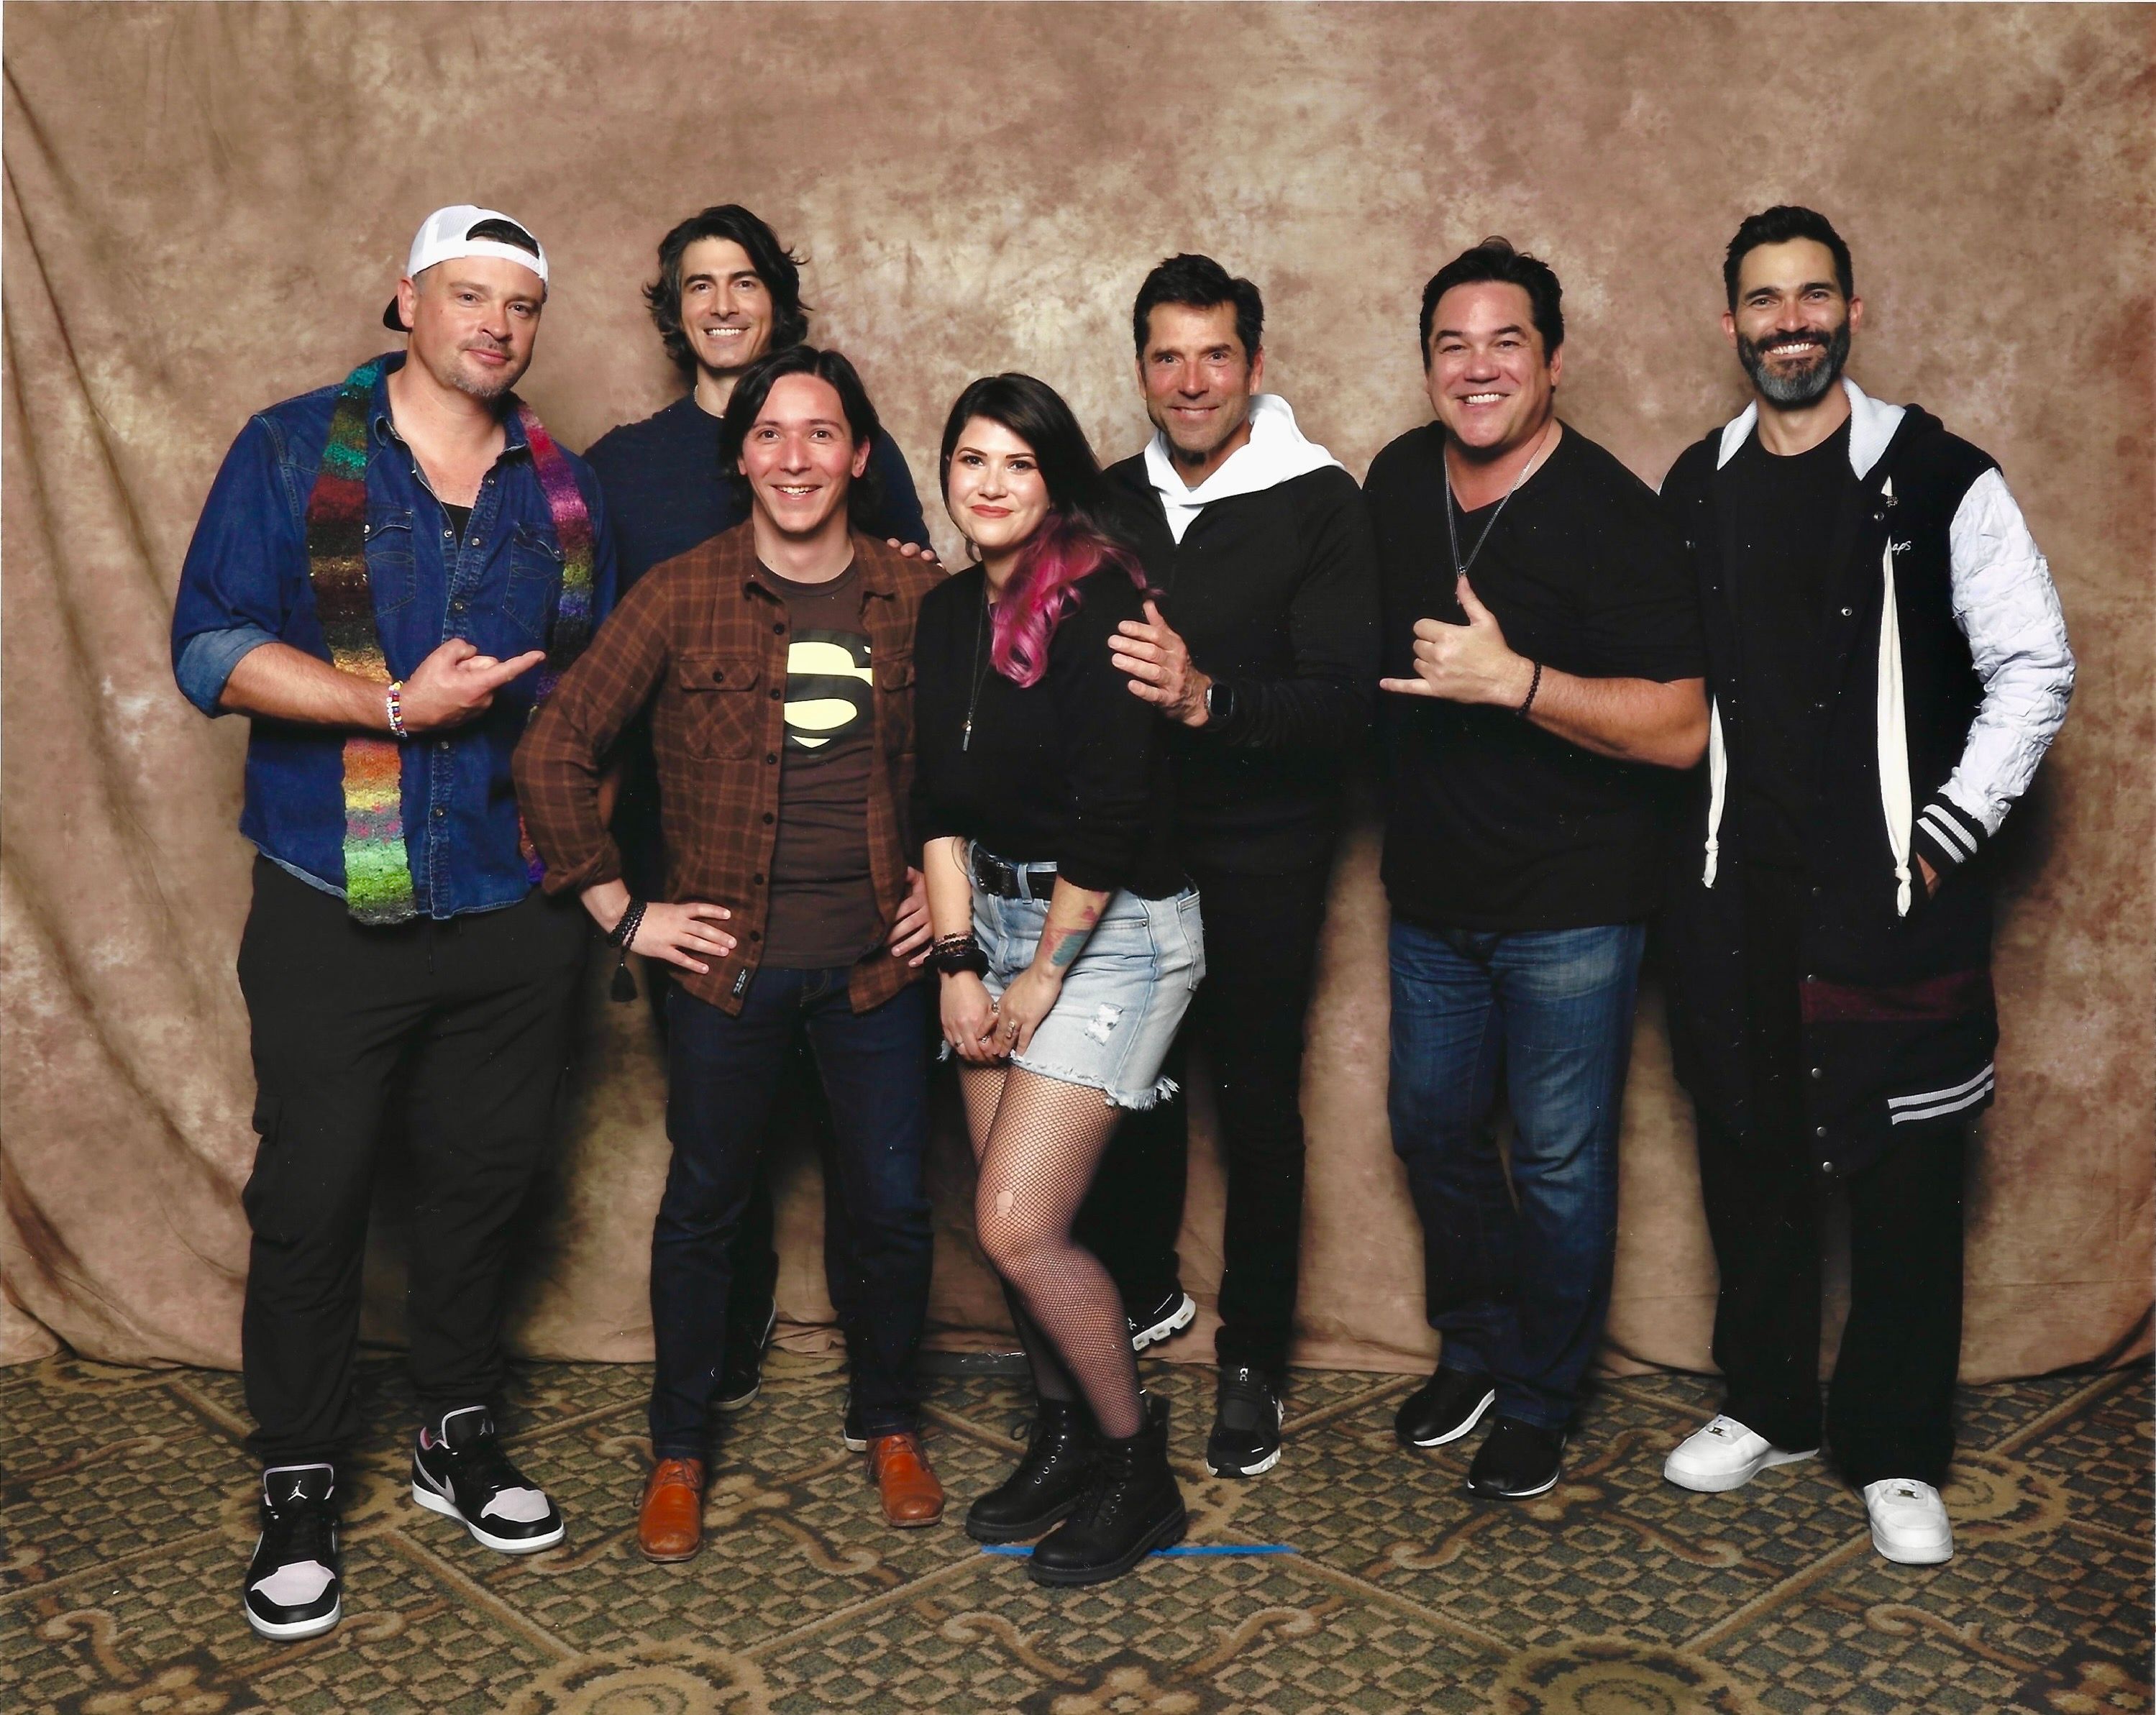 Photo with my girlfriend and I posing with Supermen Tom Welling, Brandon Routh, Gerard Christopher, Dean Cain, and Tyler Hoechlin.